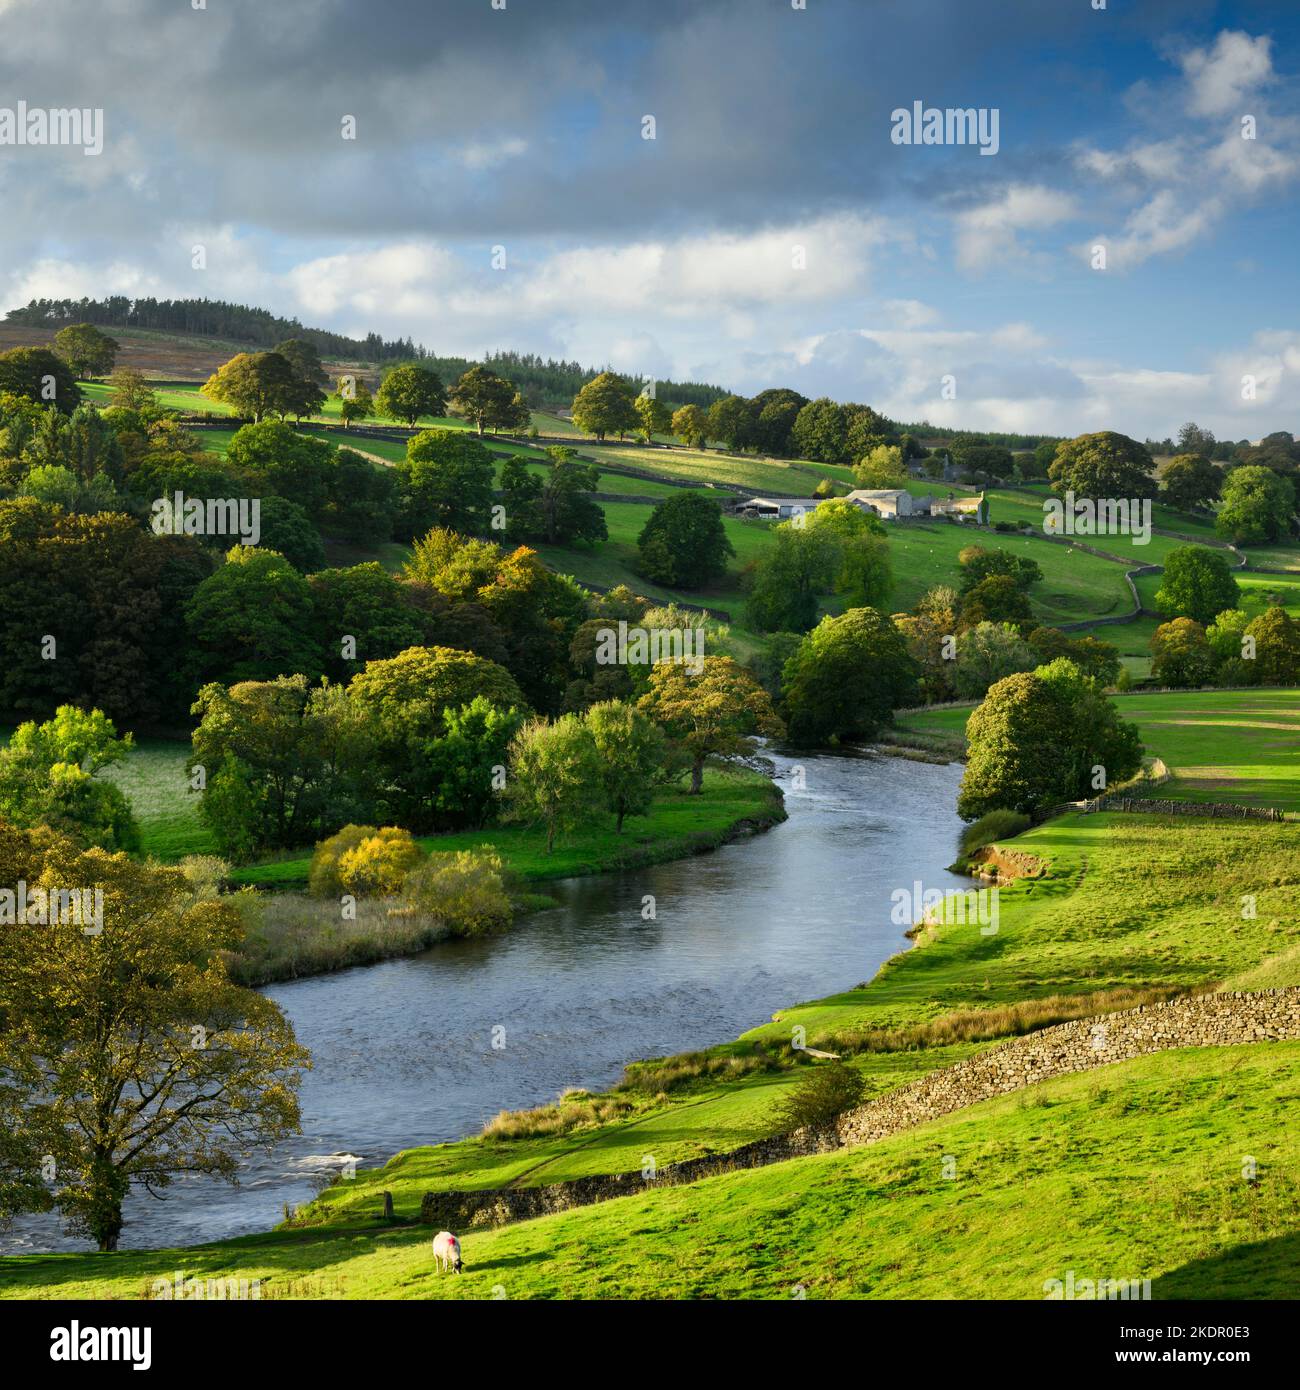 Scenic rural valley landscape (water of River Wharfe, farm buildings, riverside trees, stone wall, autumn evening sun) - Yorkshire Dales, England, UK. Stock Photo